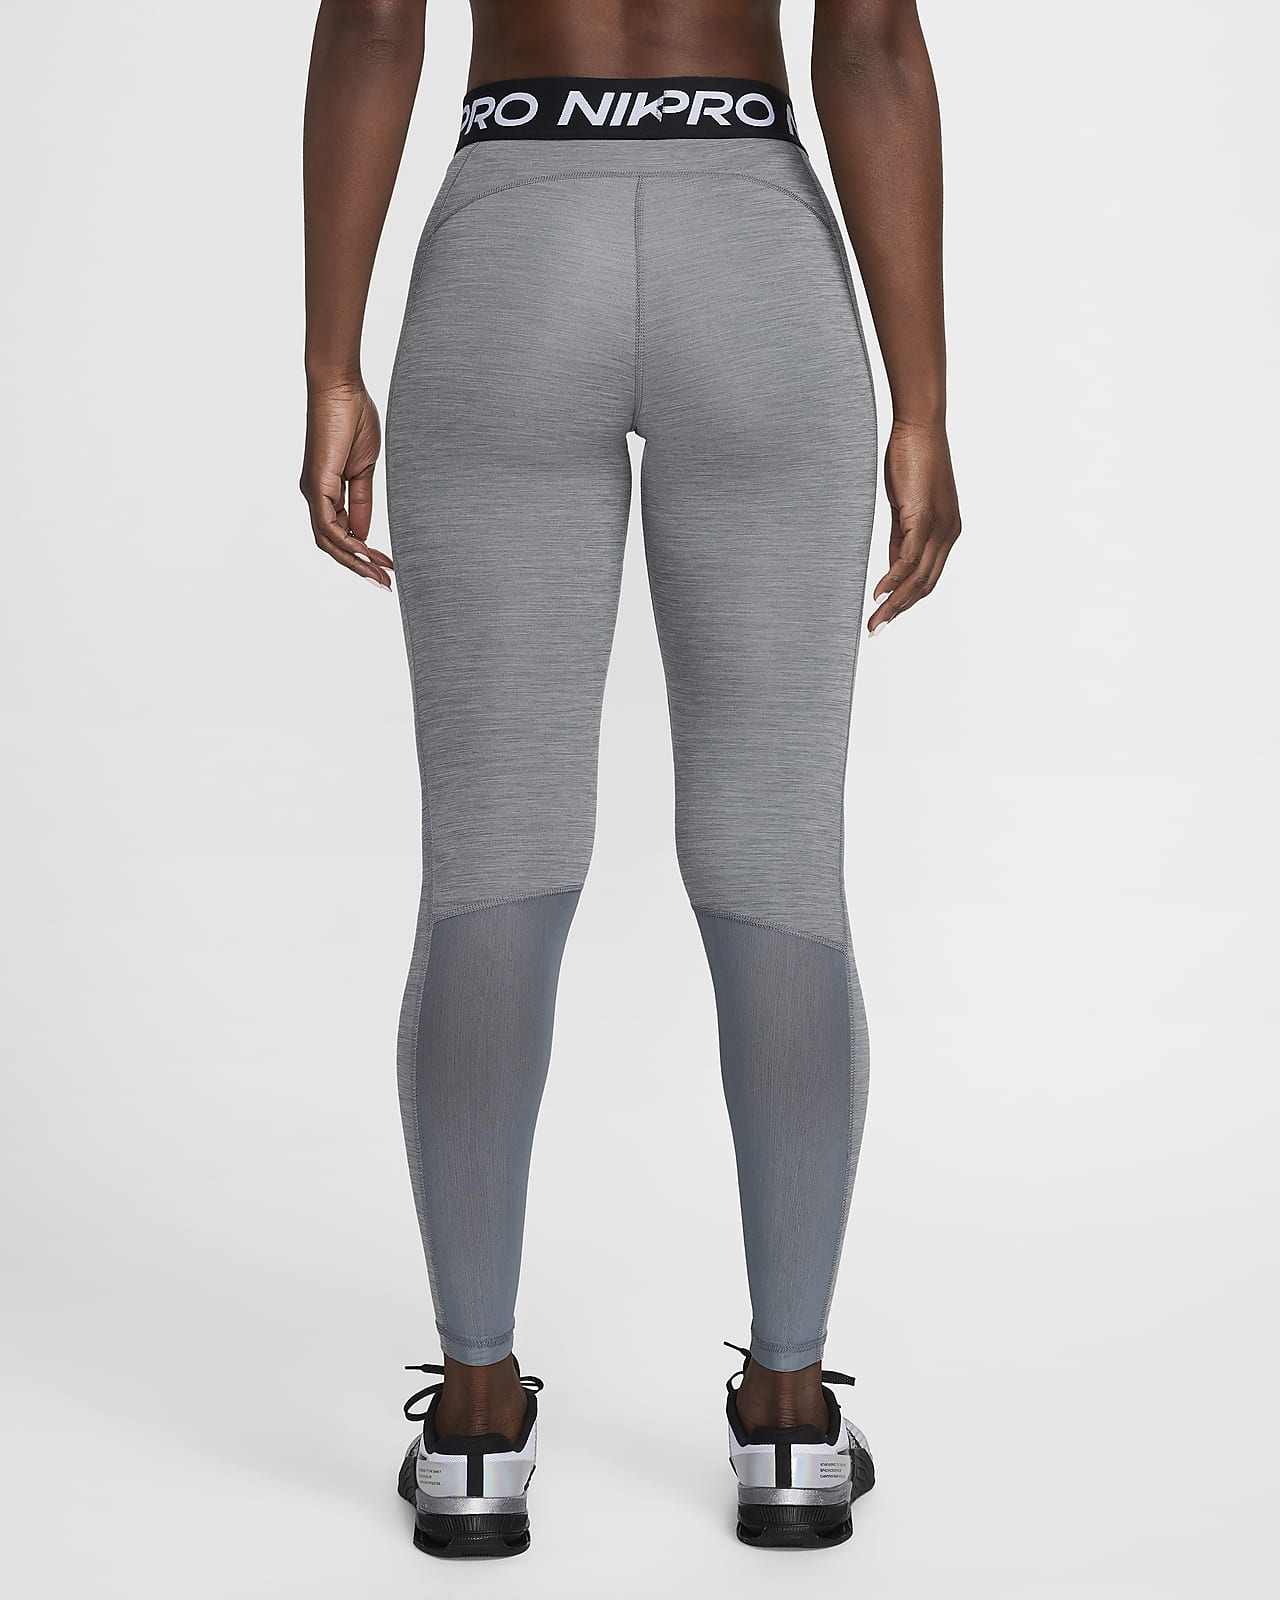 Benefits of Running in Tights. Nike IL